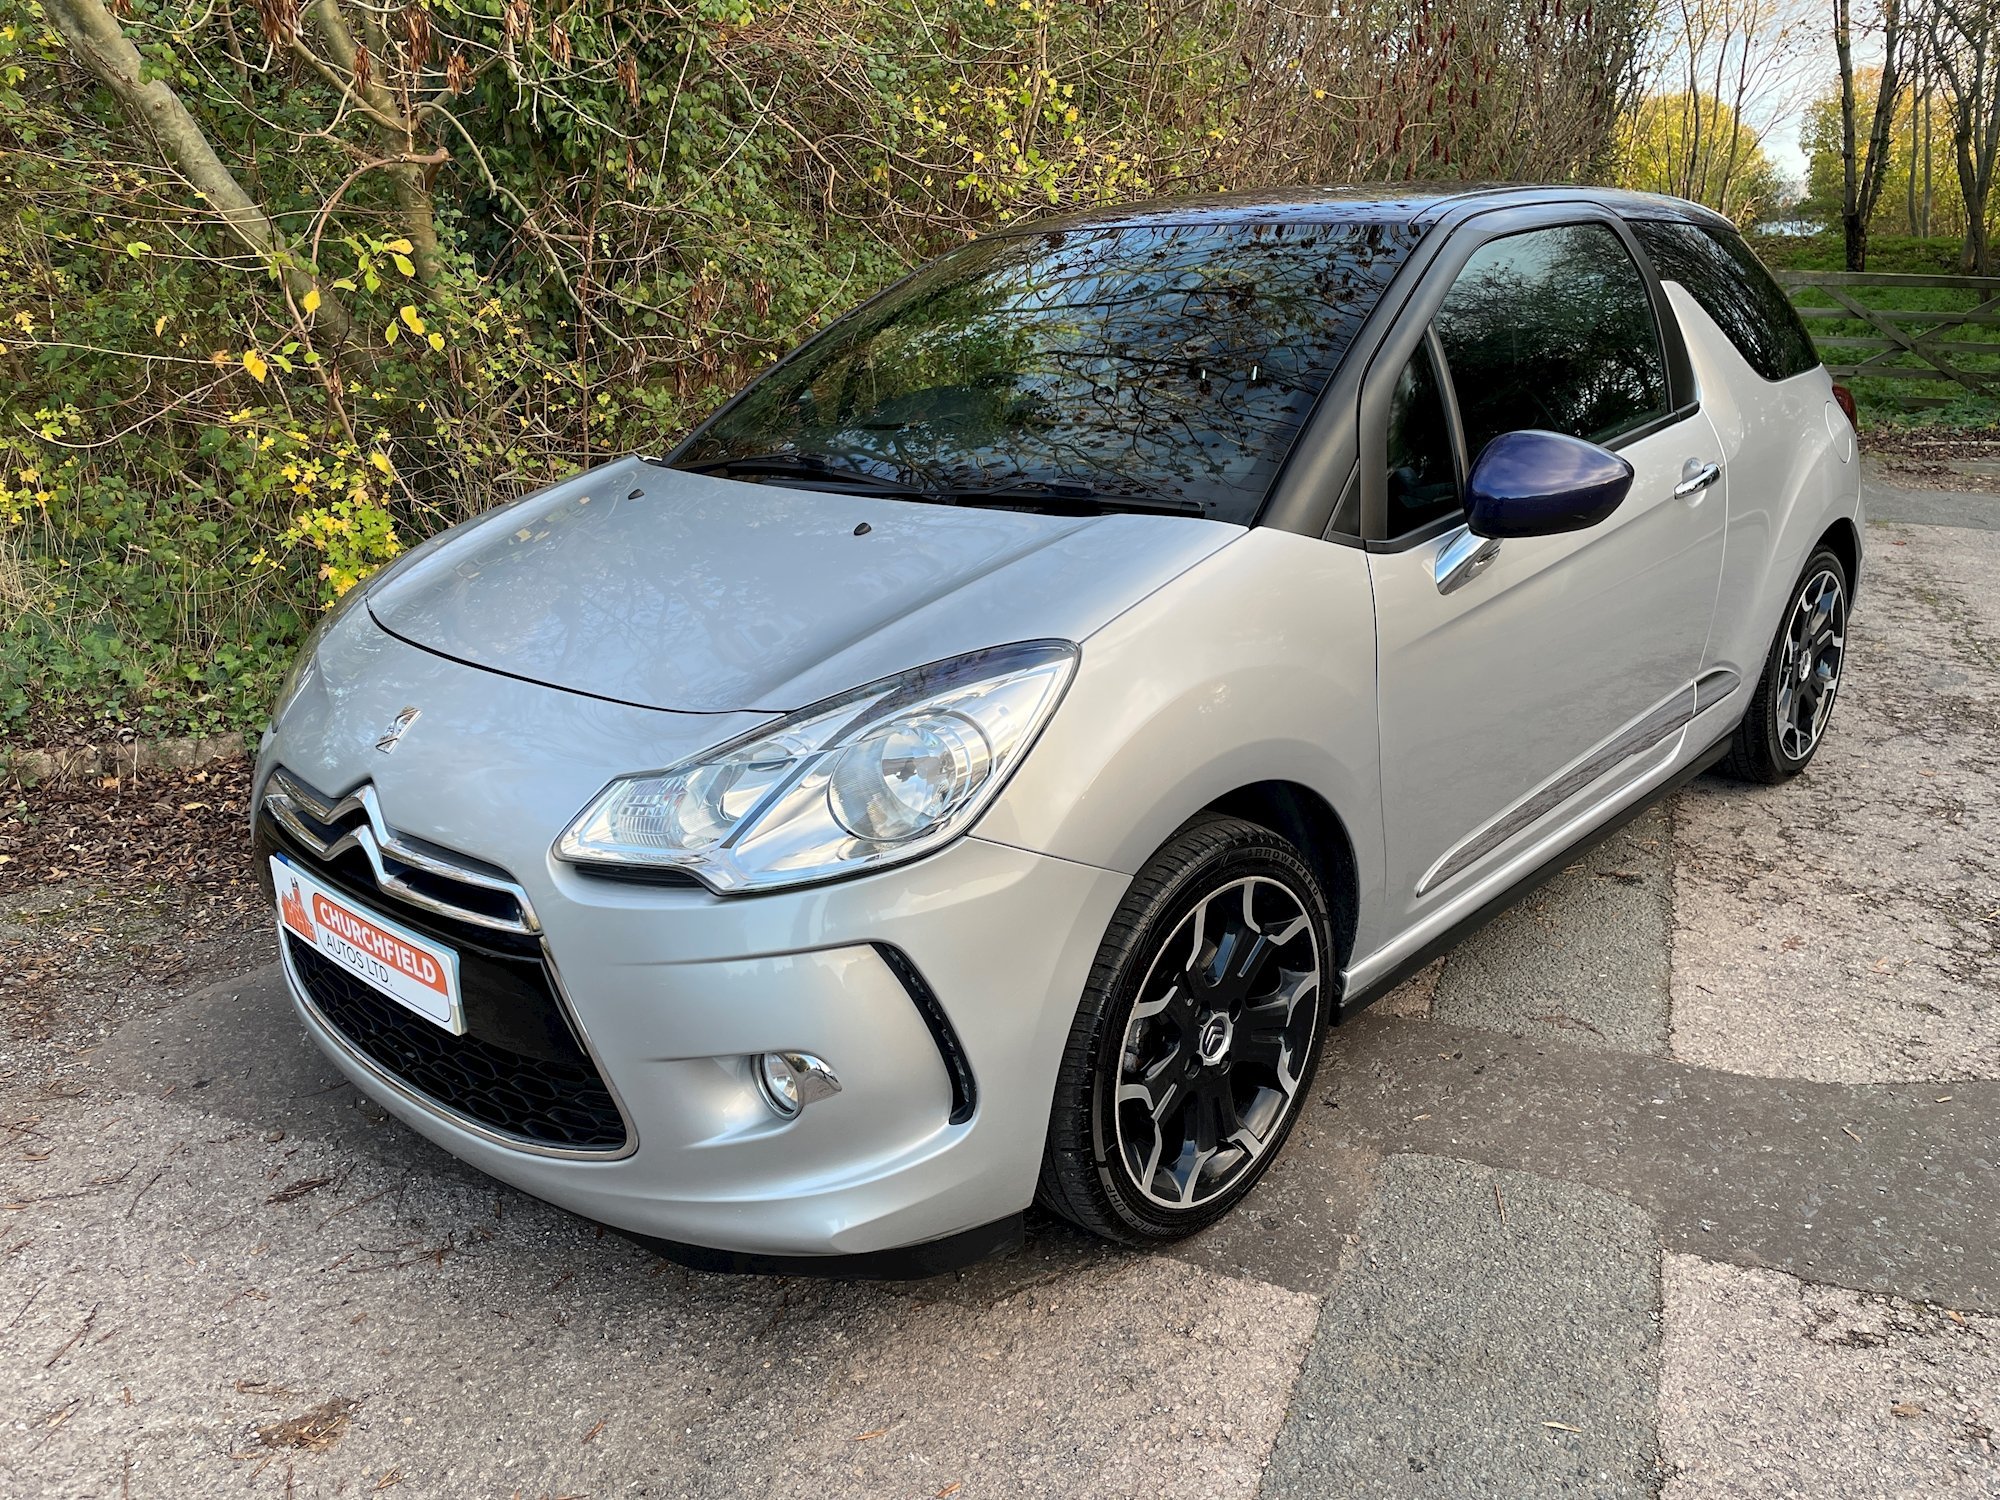 Used Citroen DS3 1.6 E-HDI DSTYLE PLUS 2014 3dr Manual (MF14EEO)